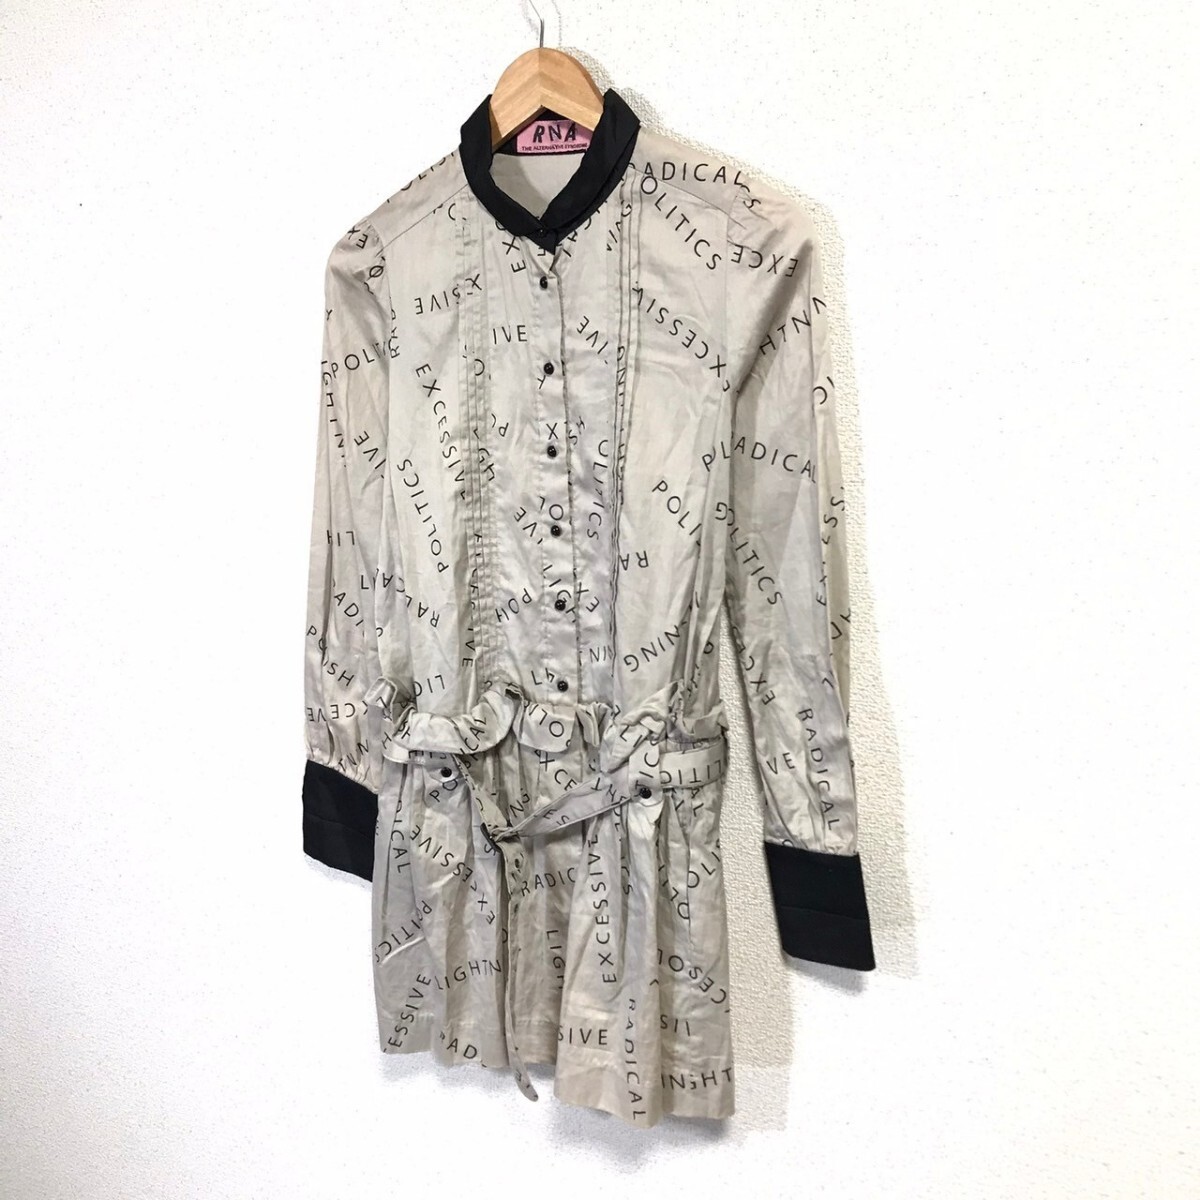 H7497dL RNAa-ruene- size M shirt One-piece blouse shirt dress gray × black britain character total pattern lady's cotton 100% old clothes 